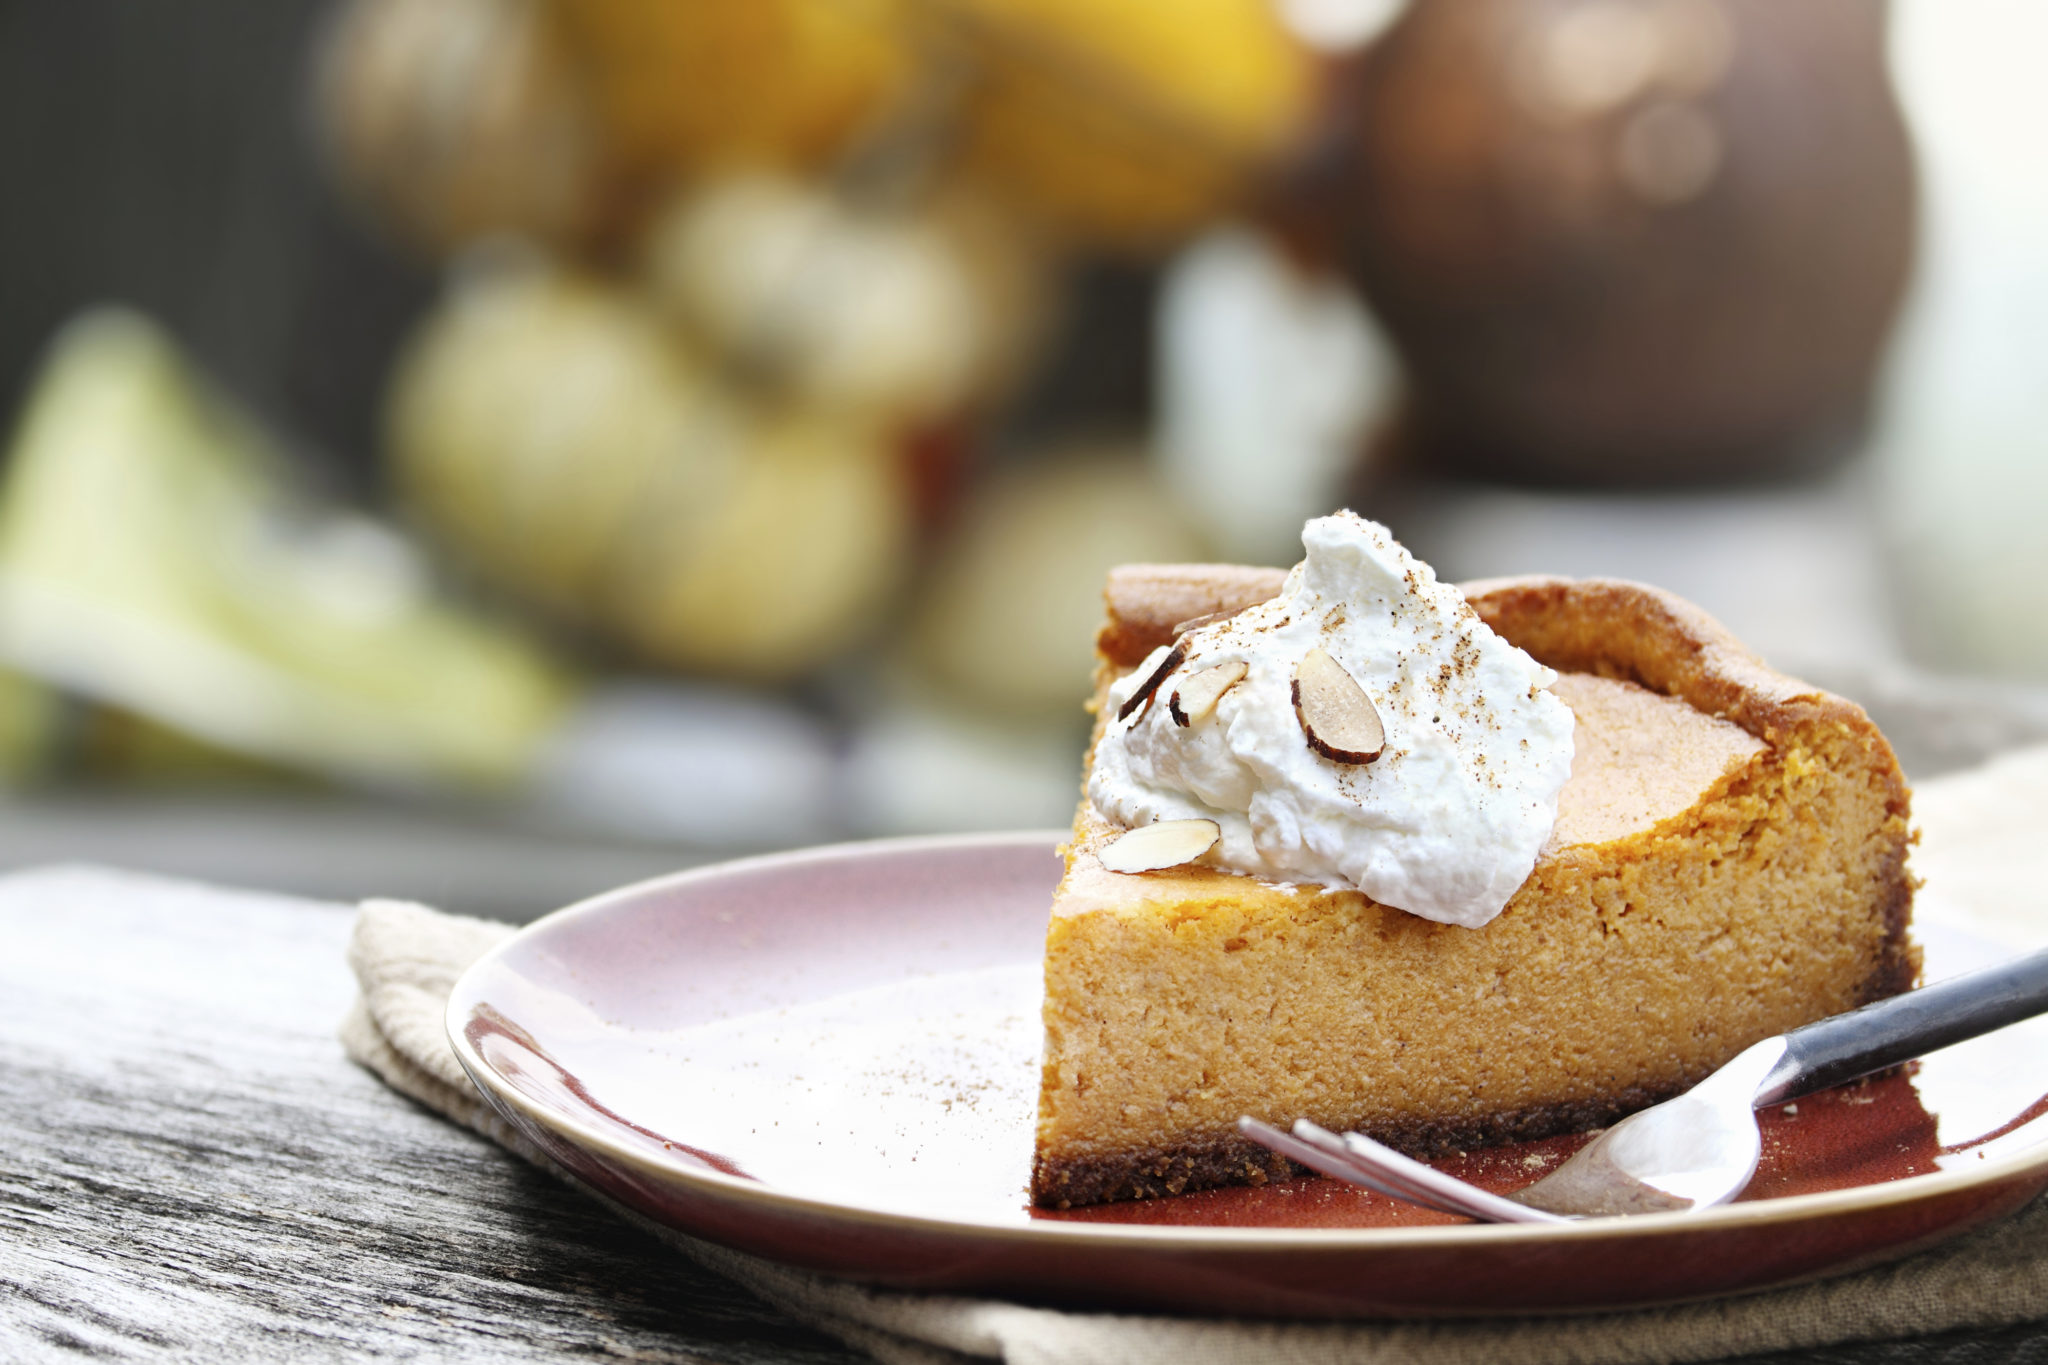 Pies have been a favored dessert across the world for hundreds of years. 